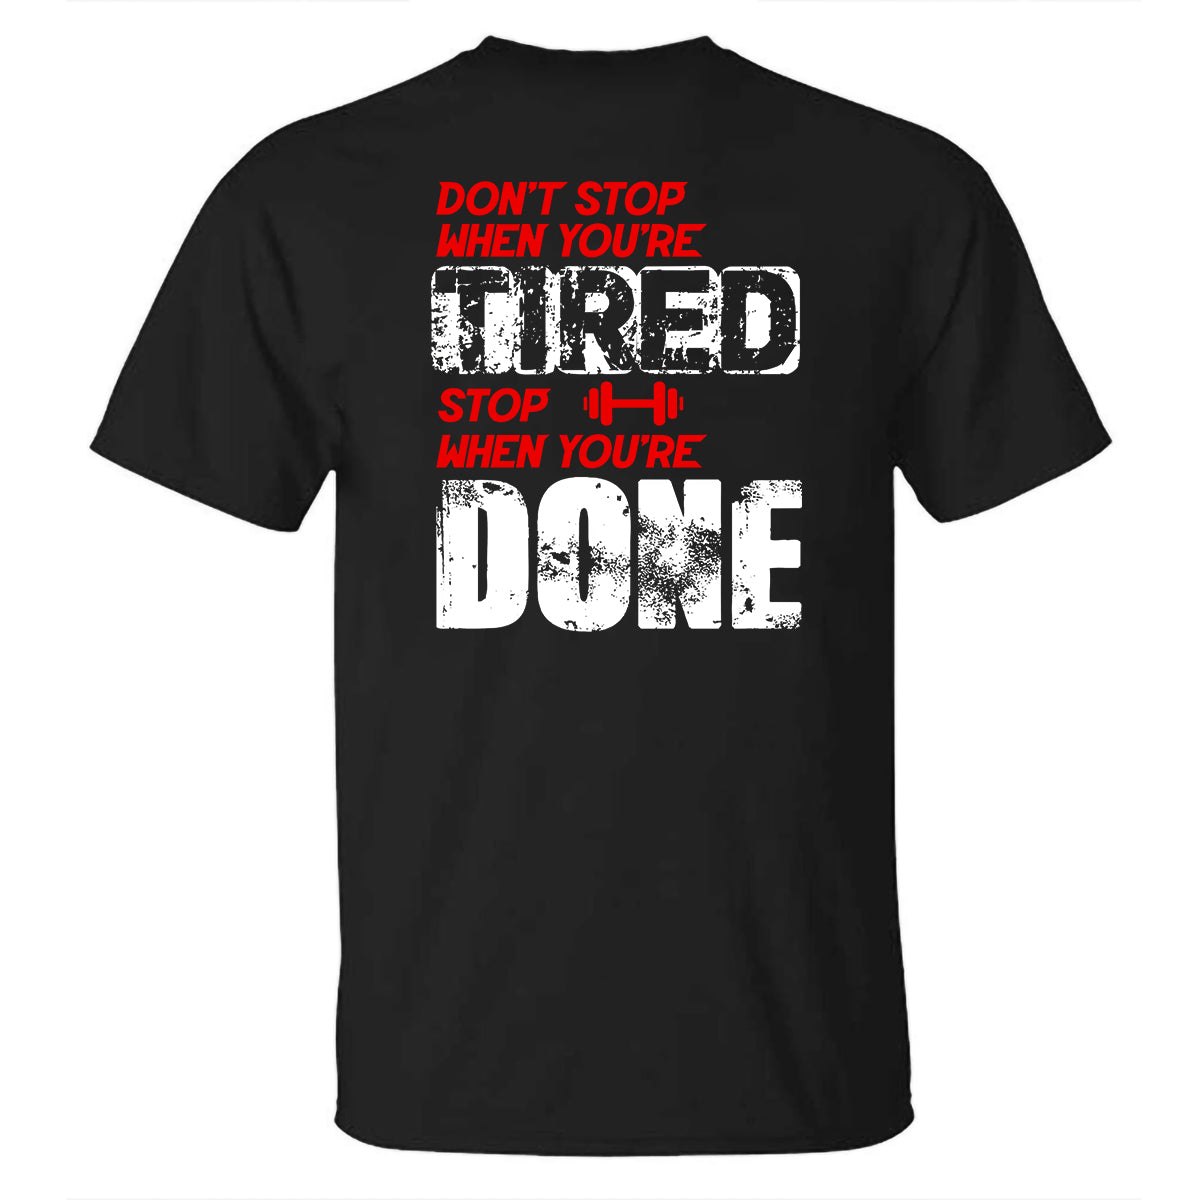 GrootWear Don't Stop When You're Tired Stop When You're Done Printed T-shirt